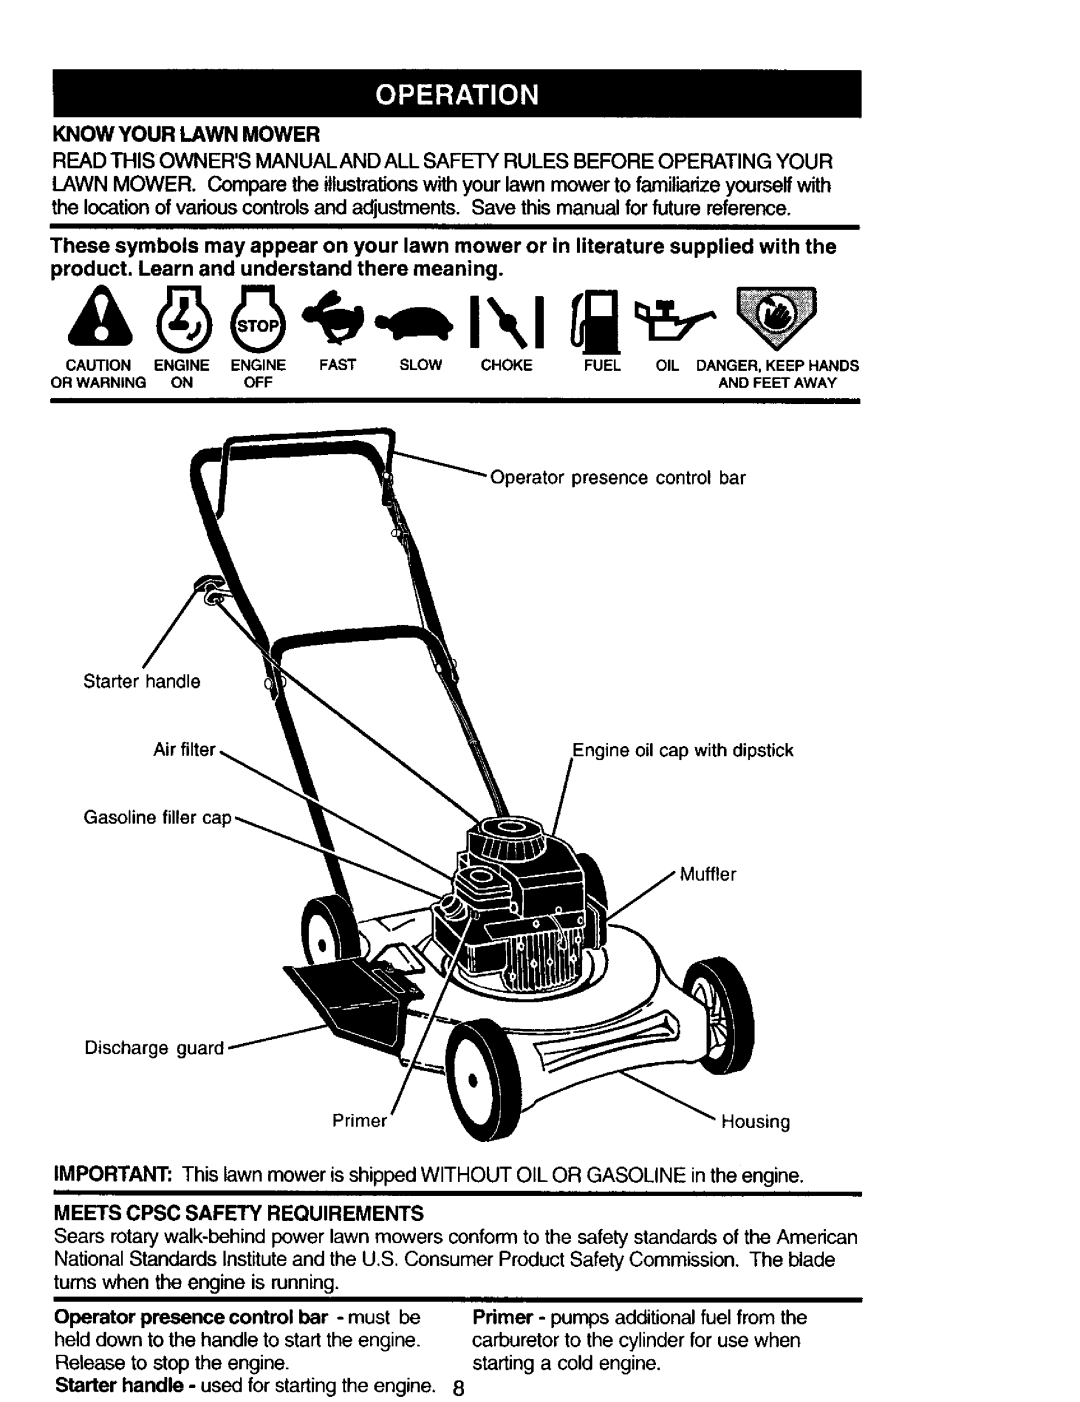 Sears 944.36201 Know Your Lawn Mower, product. Learn and understand there meaning, Meets Cpsc Safety Requirements 